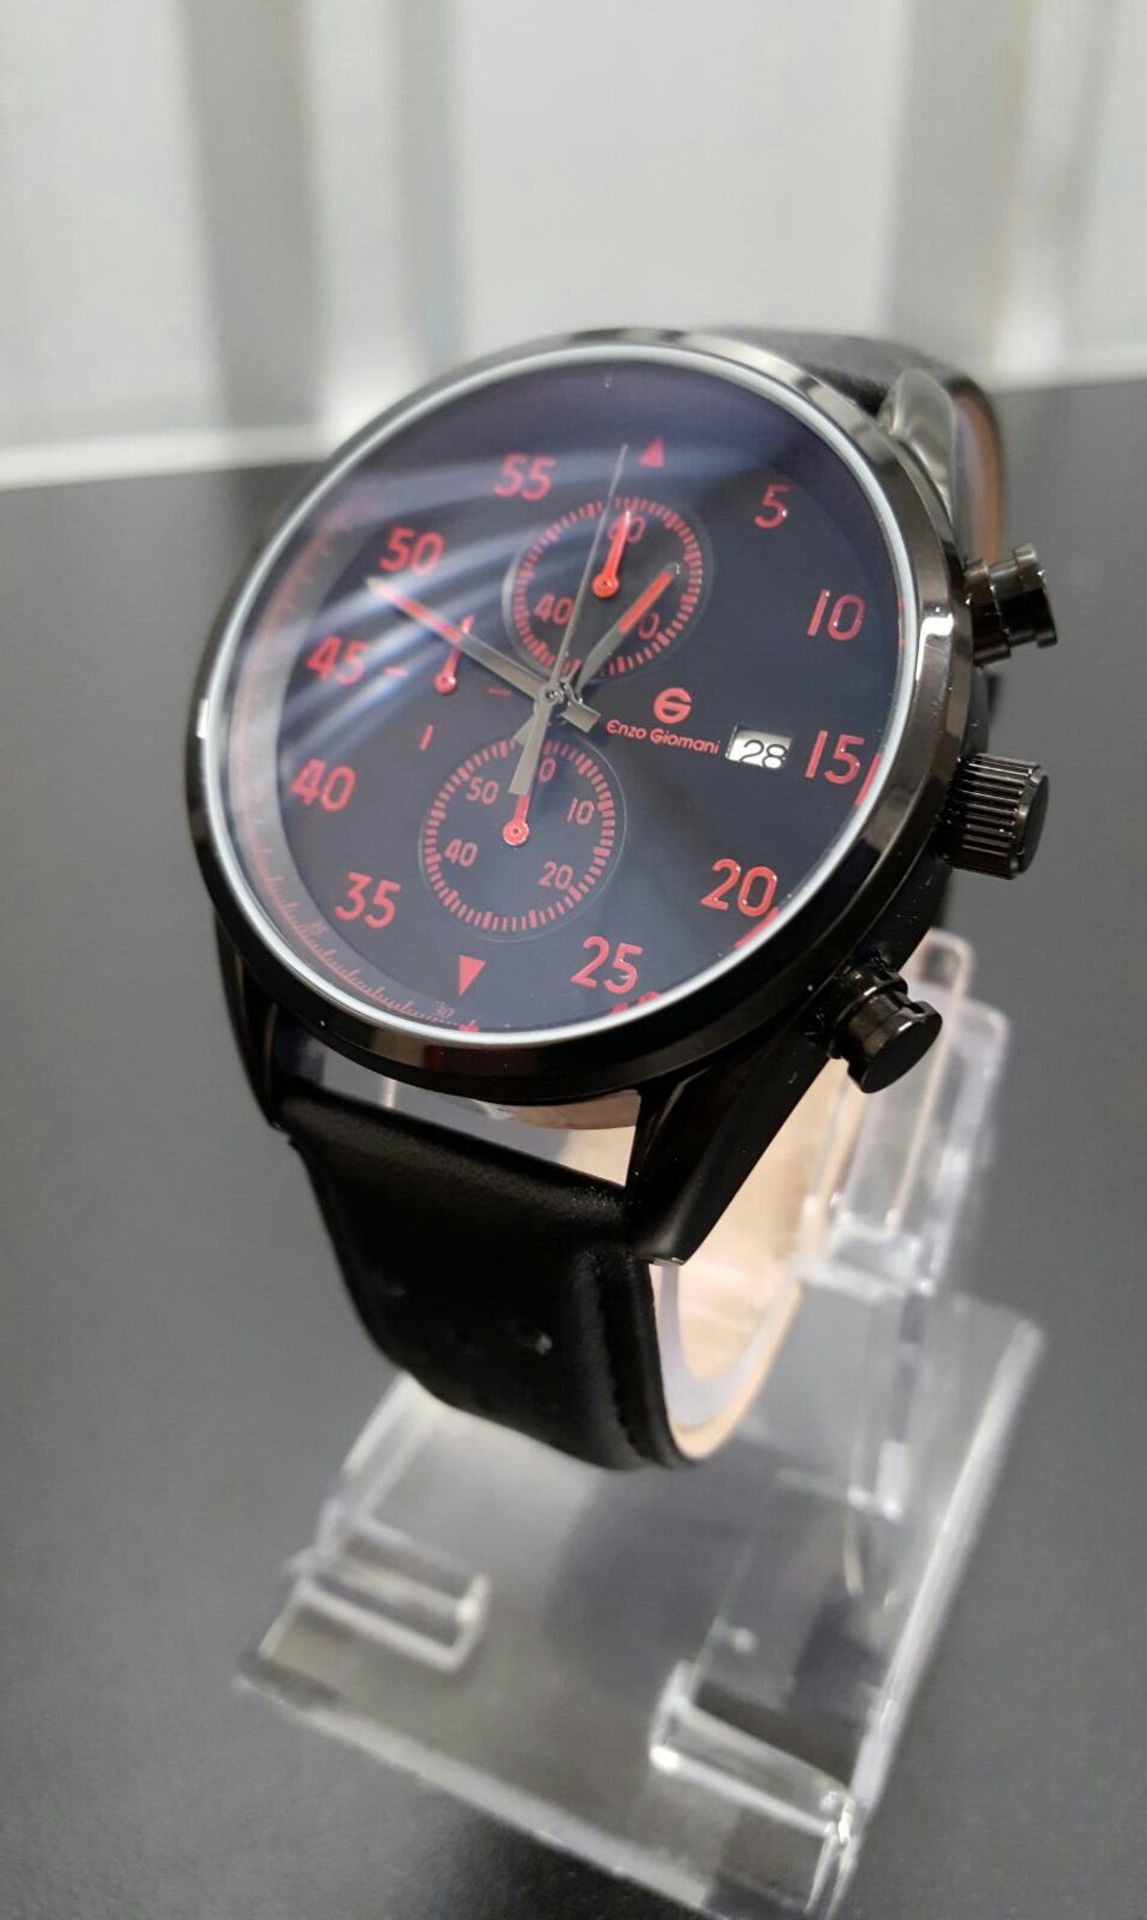 BRAND NEW ENZO GIOMANI EG0027, GENTS BLACK FACE, BLACK LEATHER STRAP CHRONOGRAPH WATCH, COMPLETE